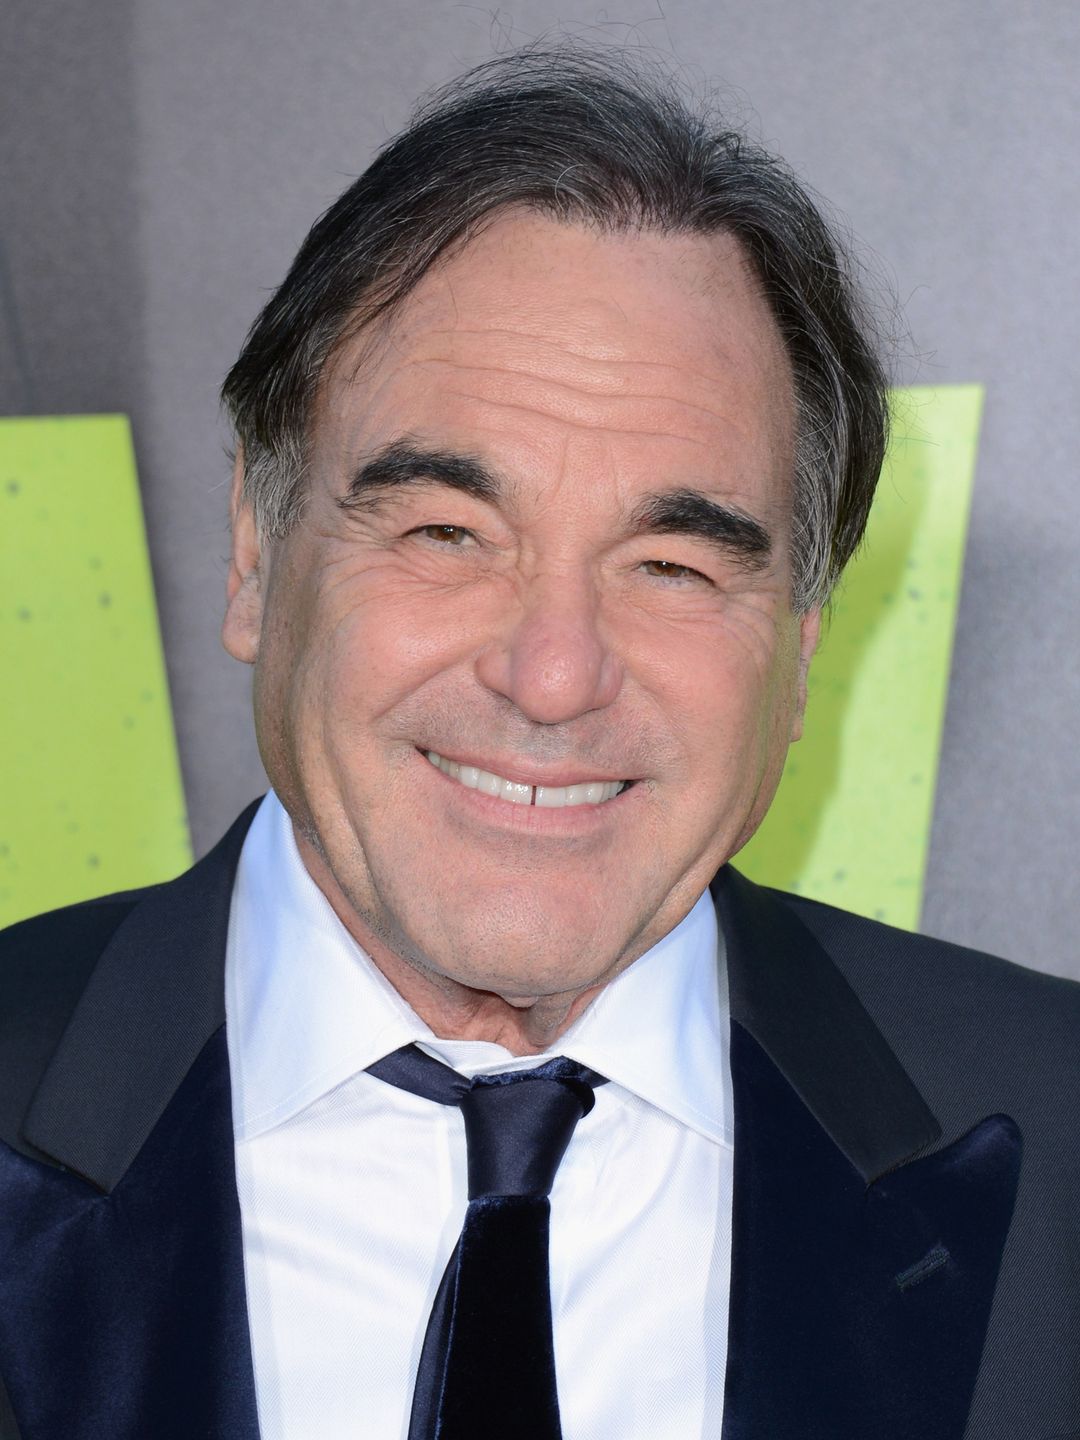 Oliver Stone where did he study